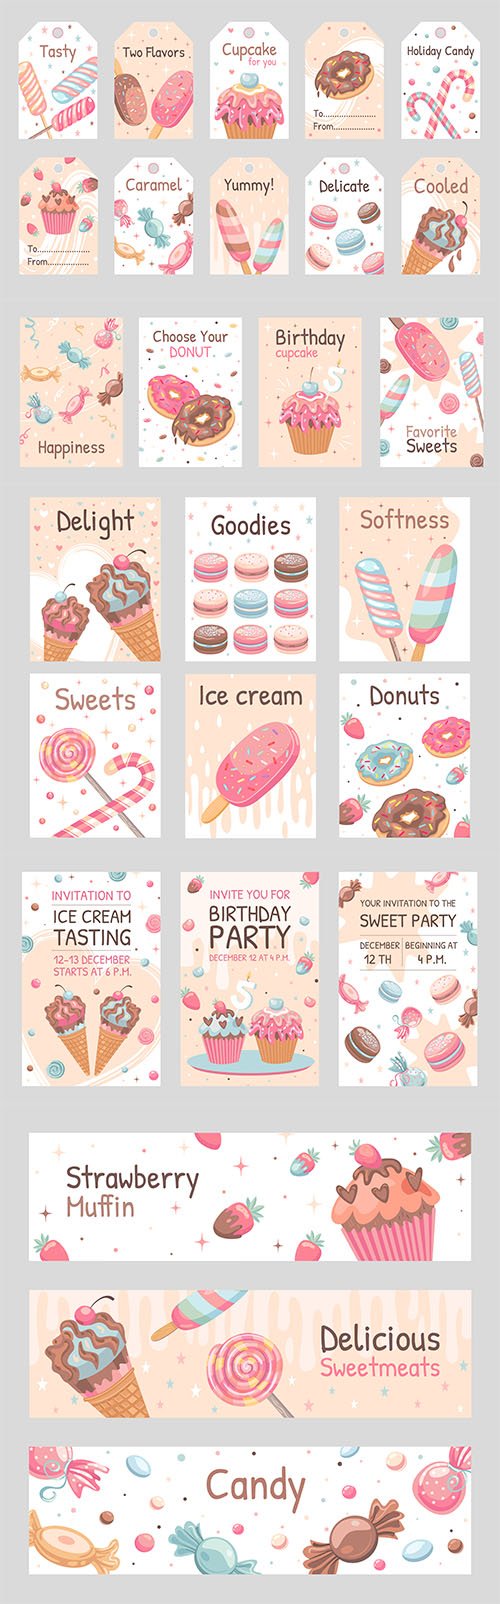 Sweets posters set of candies, donuts, ice cream, cupcake illustrations